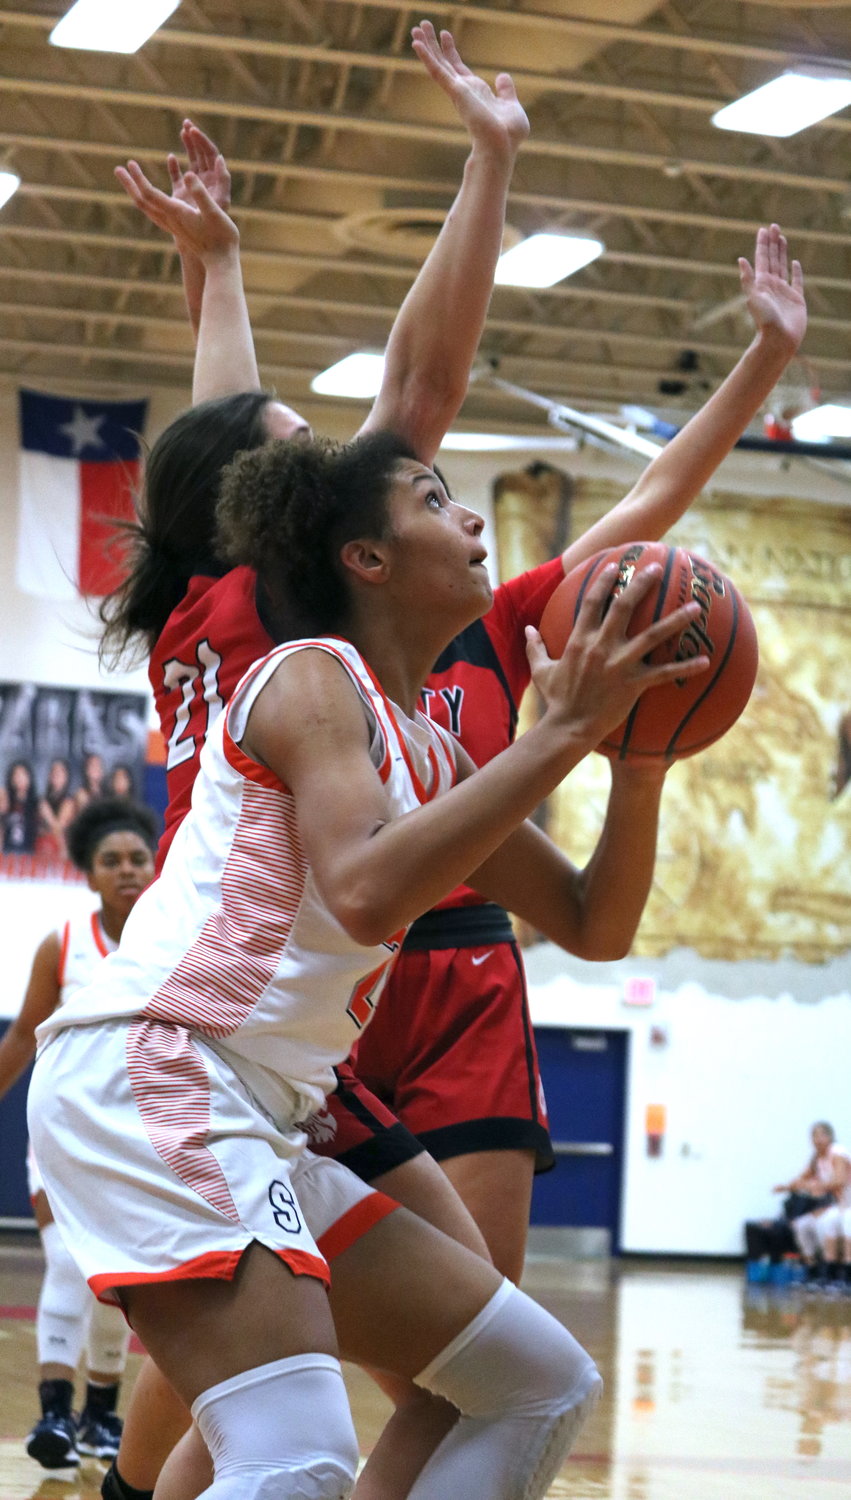 Madison Carlton gathers to go up for a shot during Tuesday's game between Katy and Seven Lakes at the Seven Lakes gym.